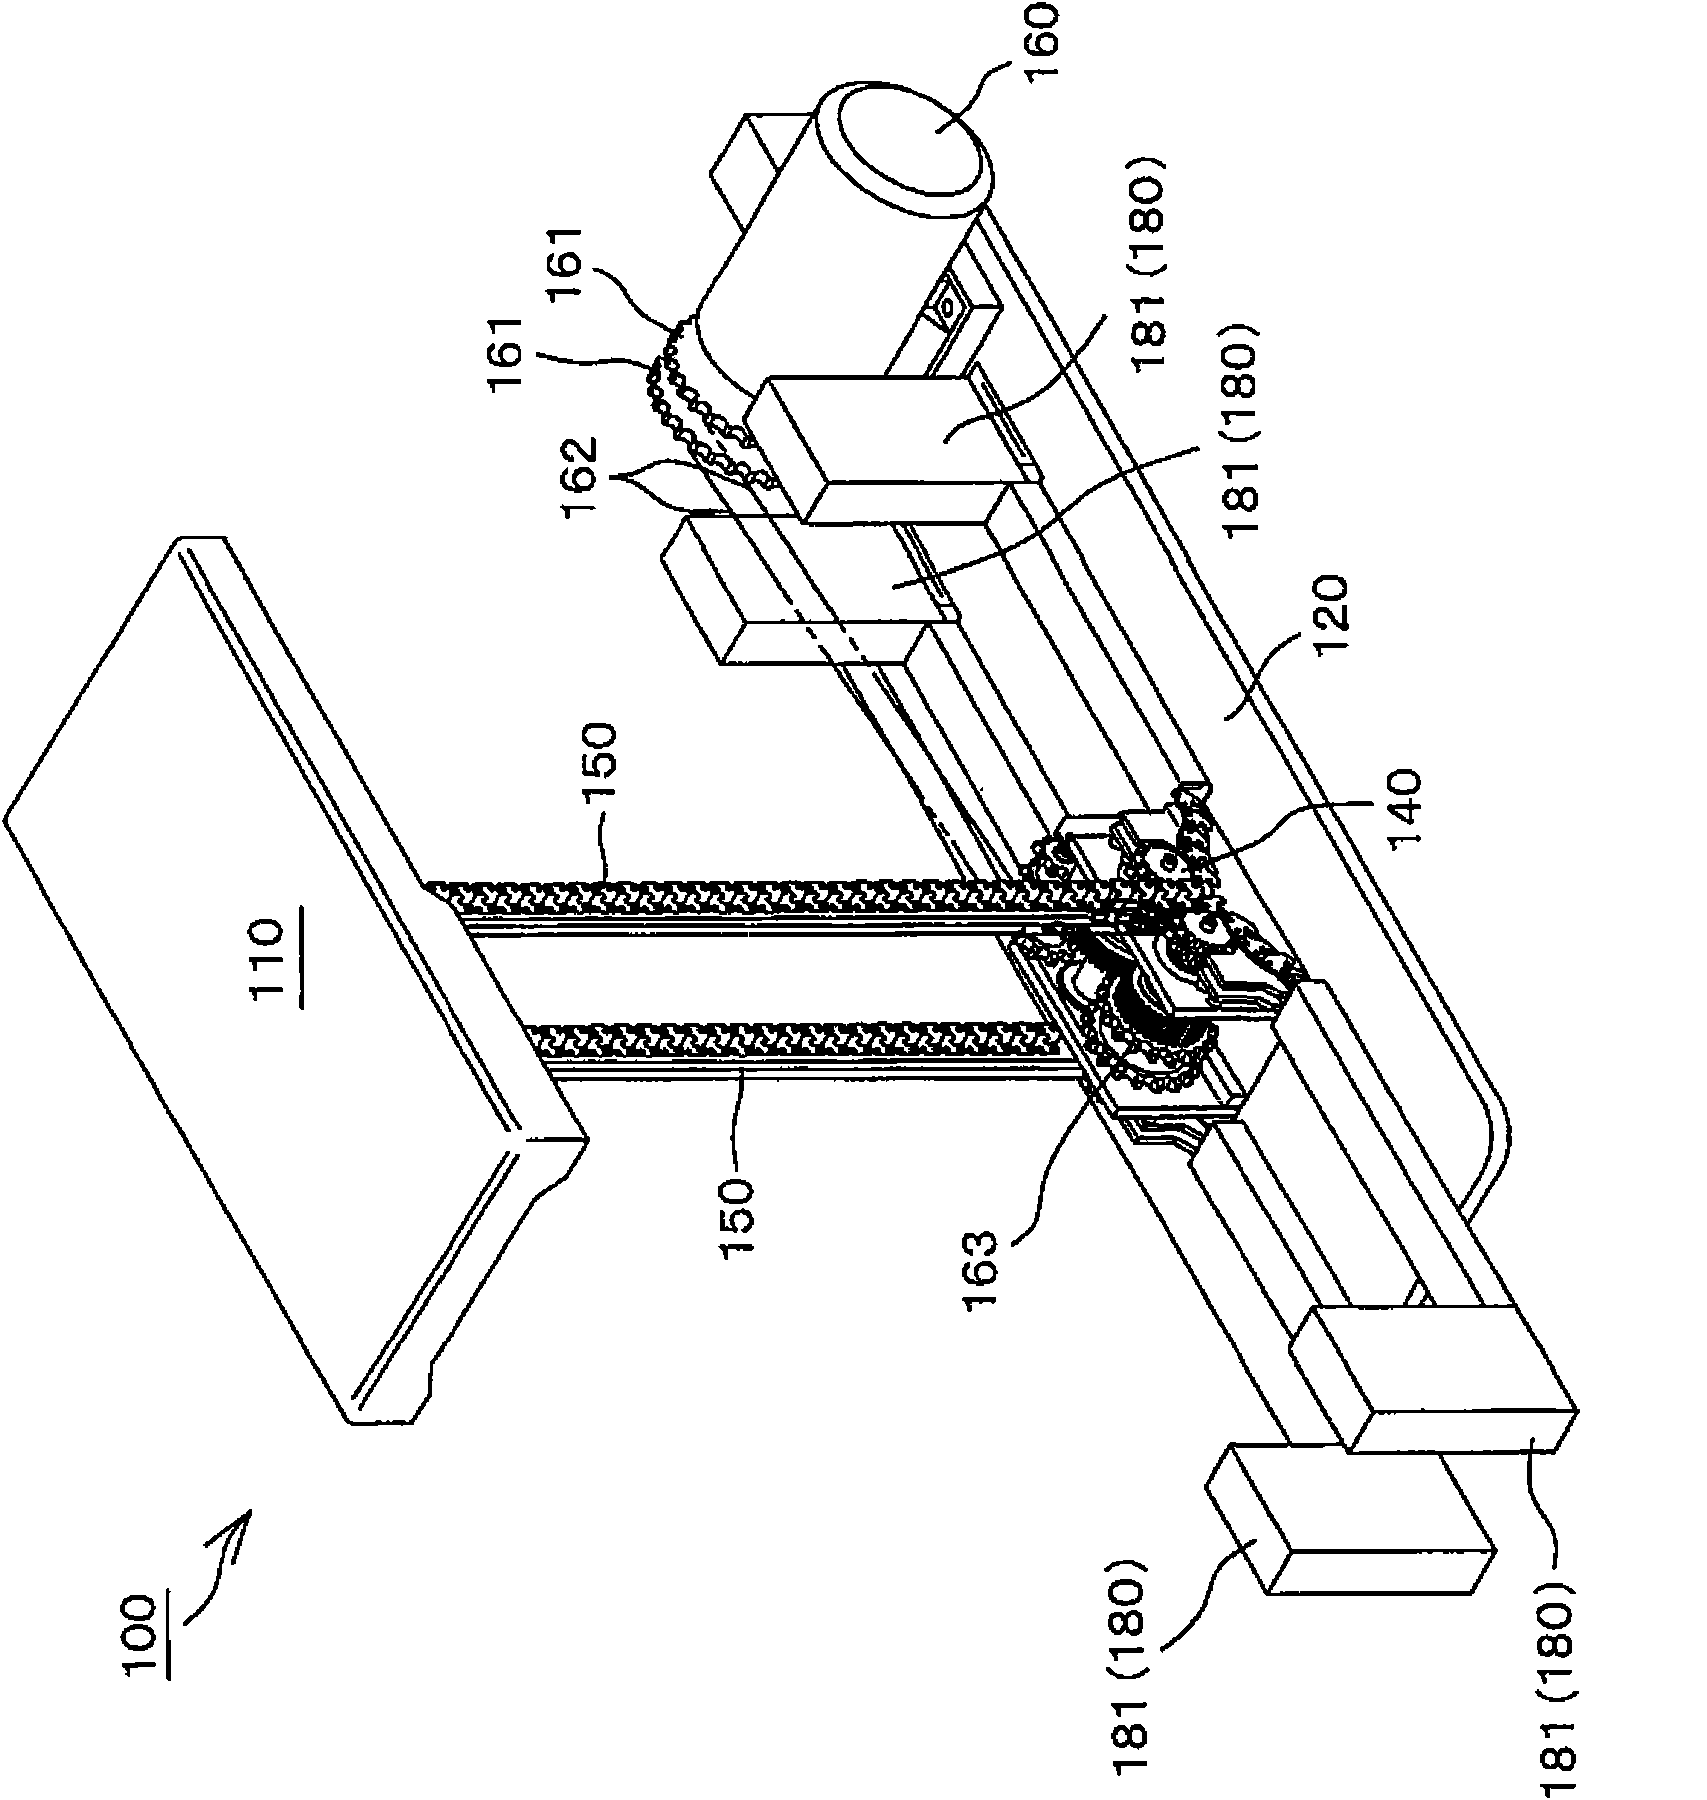 Engagement chain type driving device